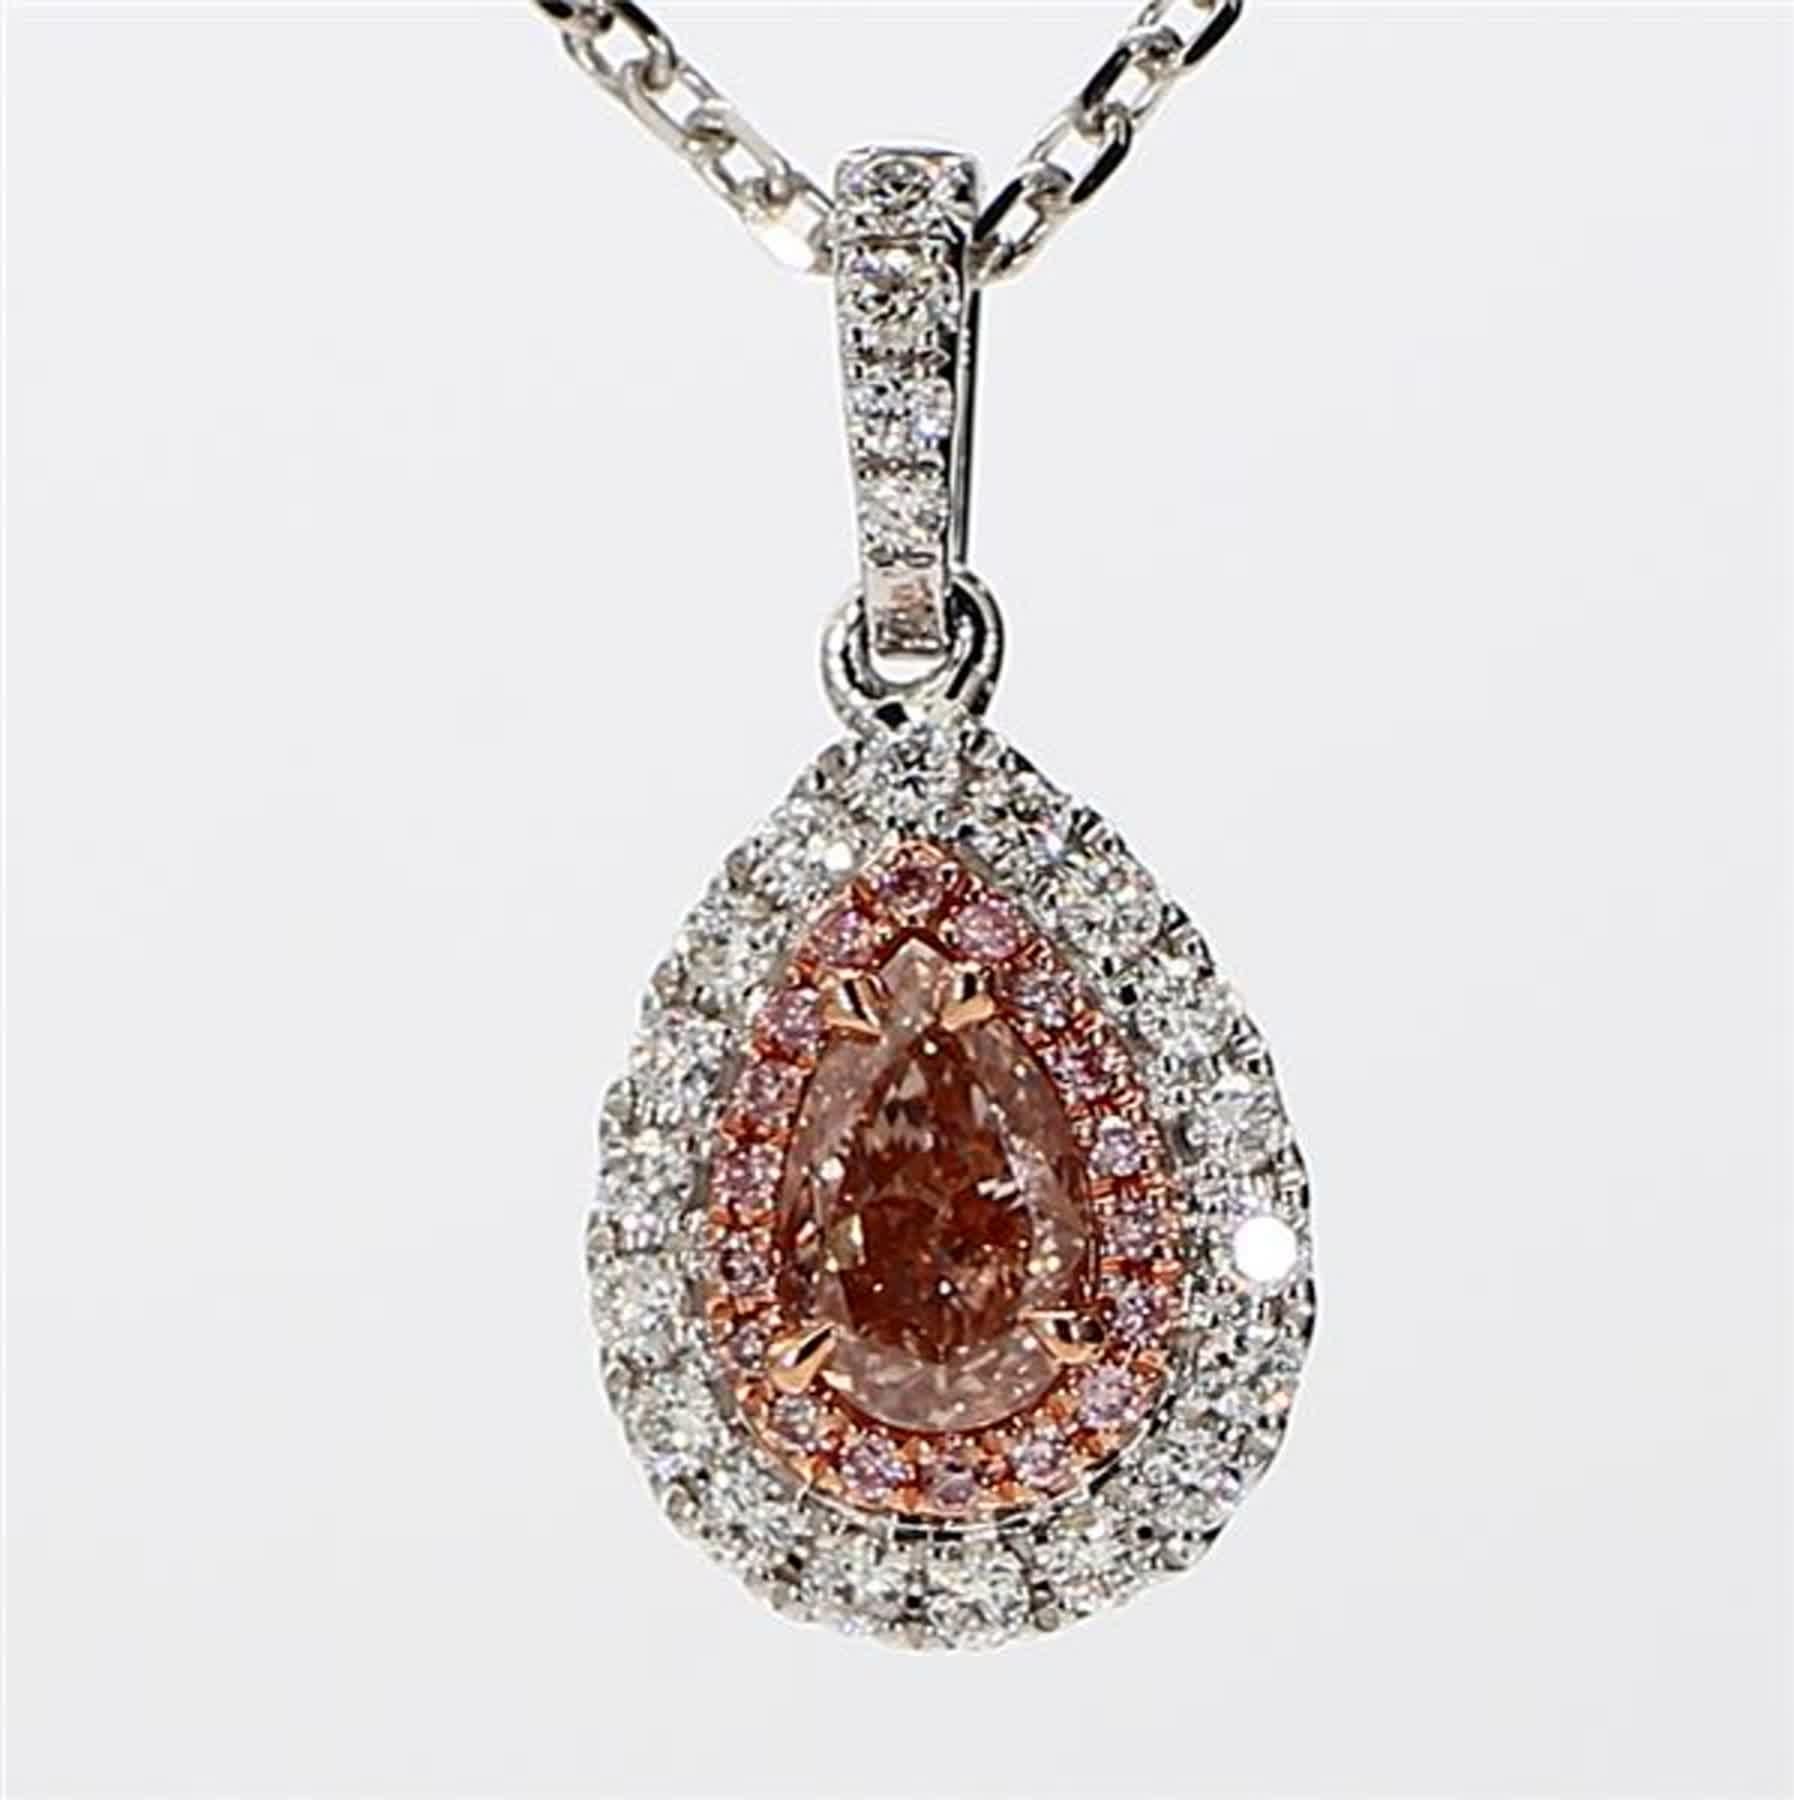 RareGemWorld's intriguing GIA certified diamond pendant. Mounted in a beautiful 18K Rose and White Gold setting with a natural pear cut pink diamond. The pink diamond is surrounded by round natural pink diamond melee and round natural white diamond